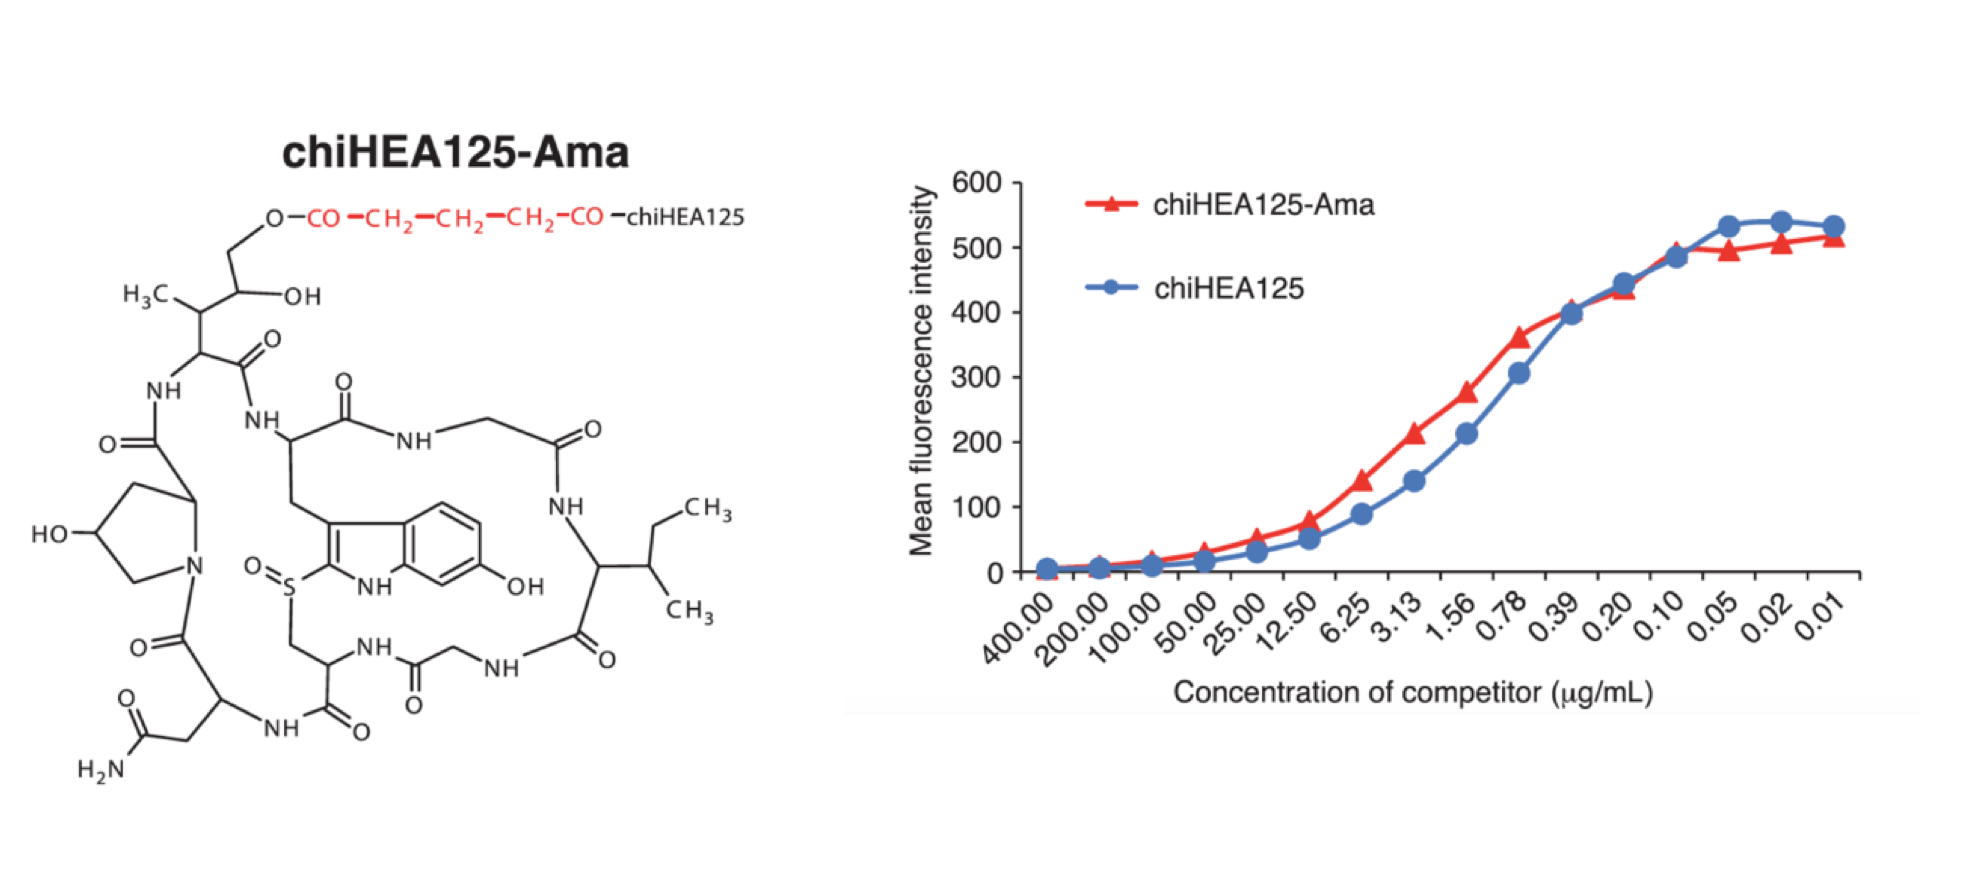  Structure of chiHEA125-Ama ADC. This ADC is constructed  by conjugating α-amanitin to an anti-EpCAM antibody (chiHEA125) via a  non-cleavable Glutarate linker (left) and it showed similar binding pattern  towards the target antigen as non-conjugated chiHEA125 antibody (right) (JNCI, 2012). 